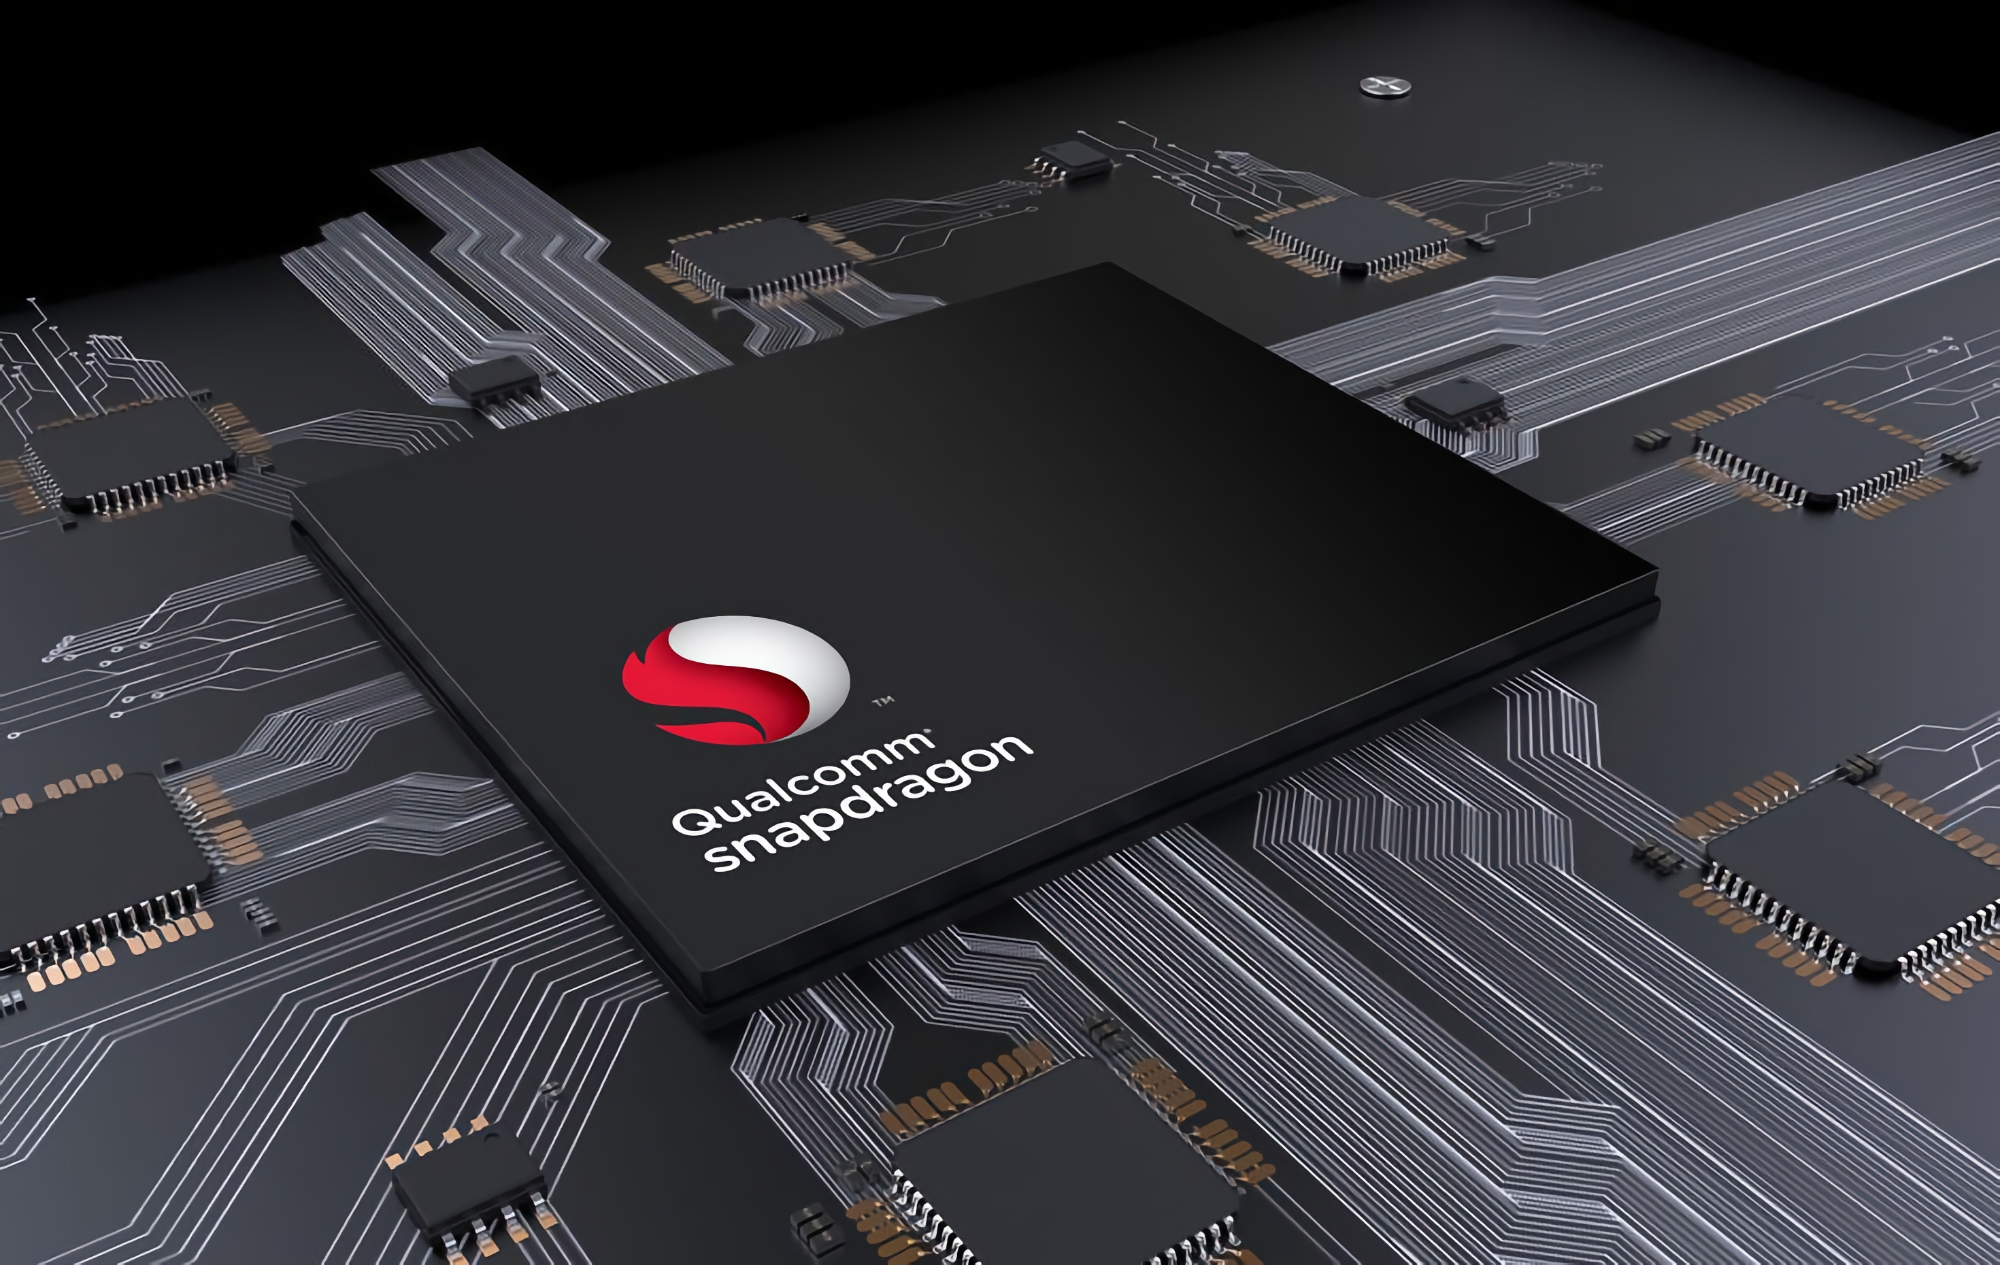 Source: Qualcomm to change the name of new flagship chip Snapdragon 898 to Snapdragon 8 gen1